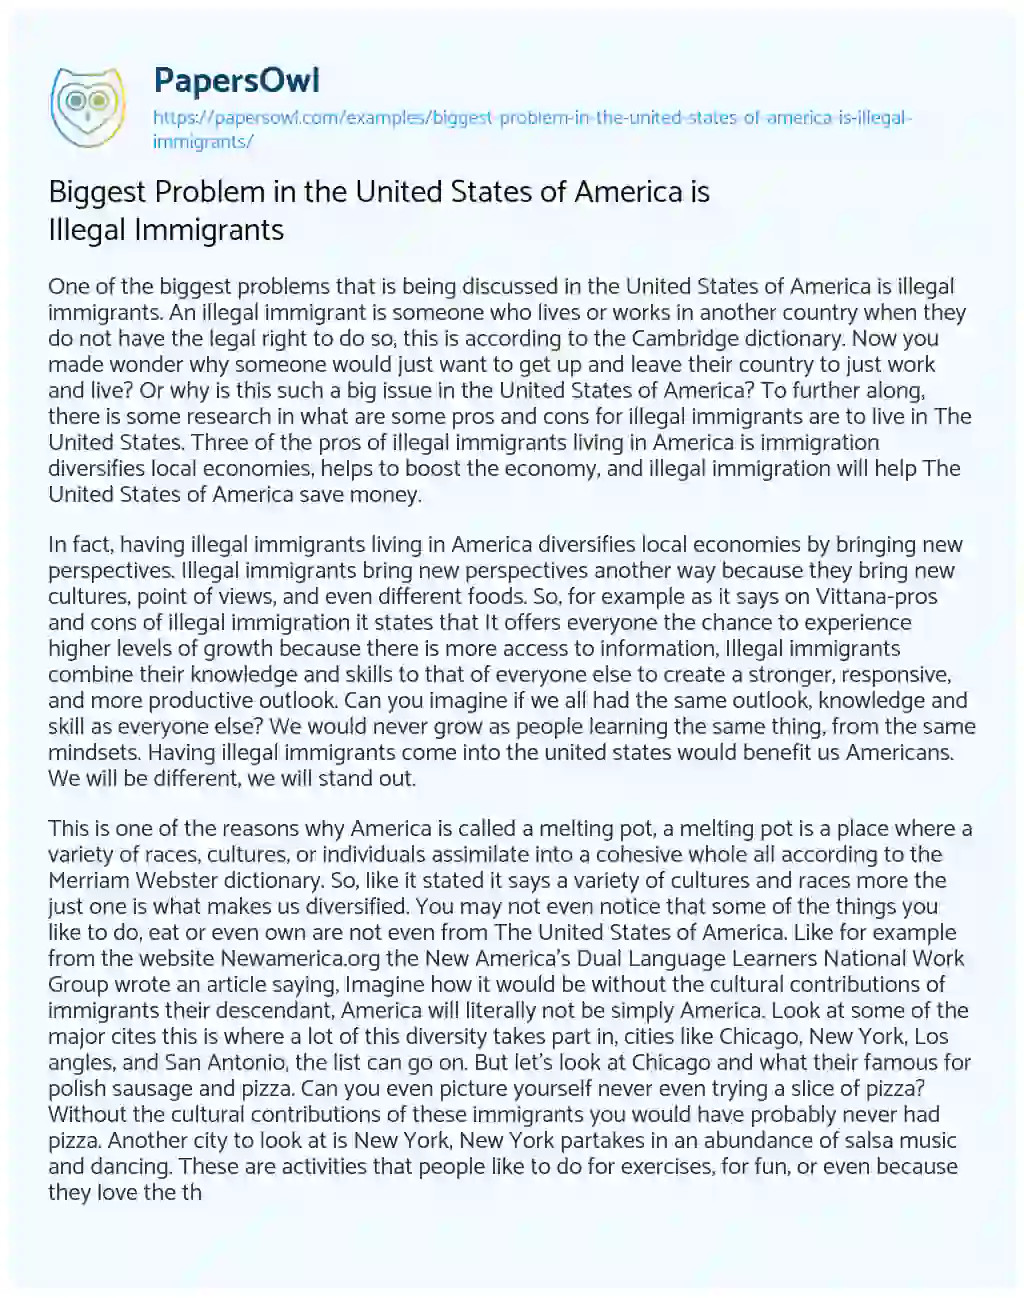 Essay on Biggest Problem in the United States of America is Illegal Immigrants